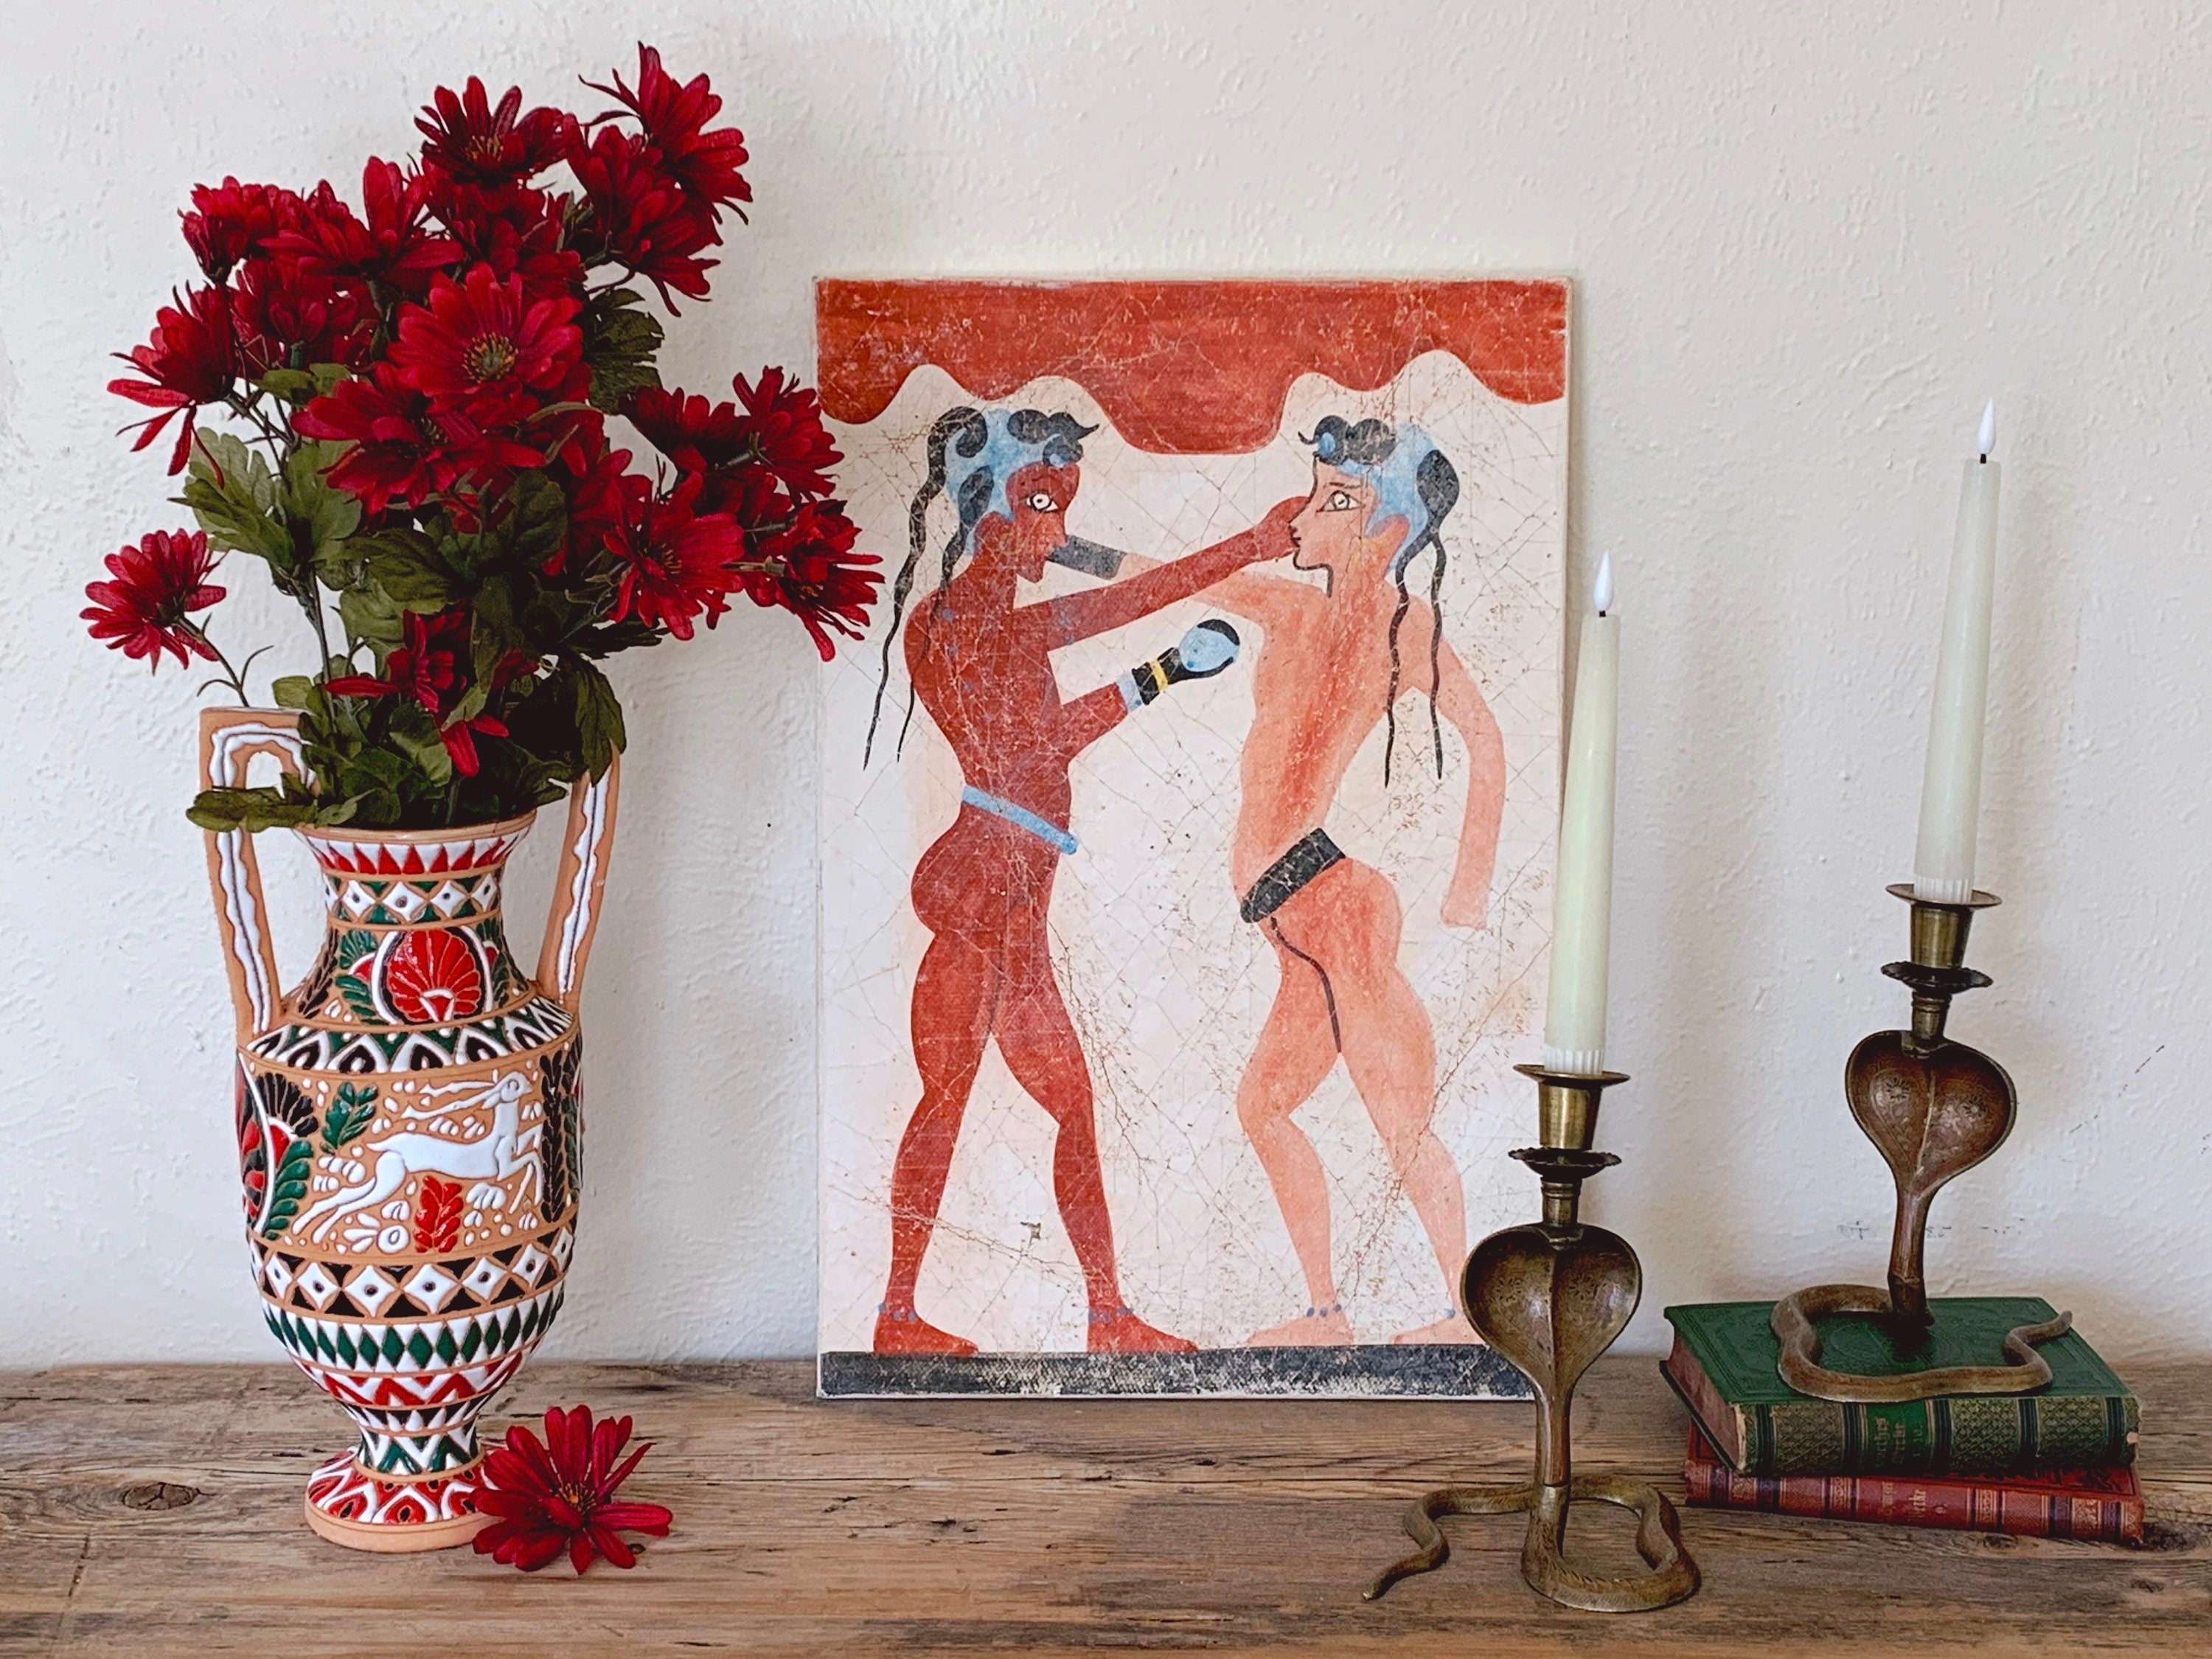 Vintage Hand Made Greek Fresco Painting of “The Boxing Children” from Akrotiri | Quirky Fun Wall Art Home Decor | Made in Greece